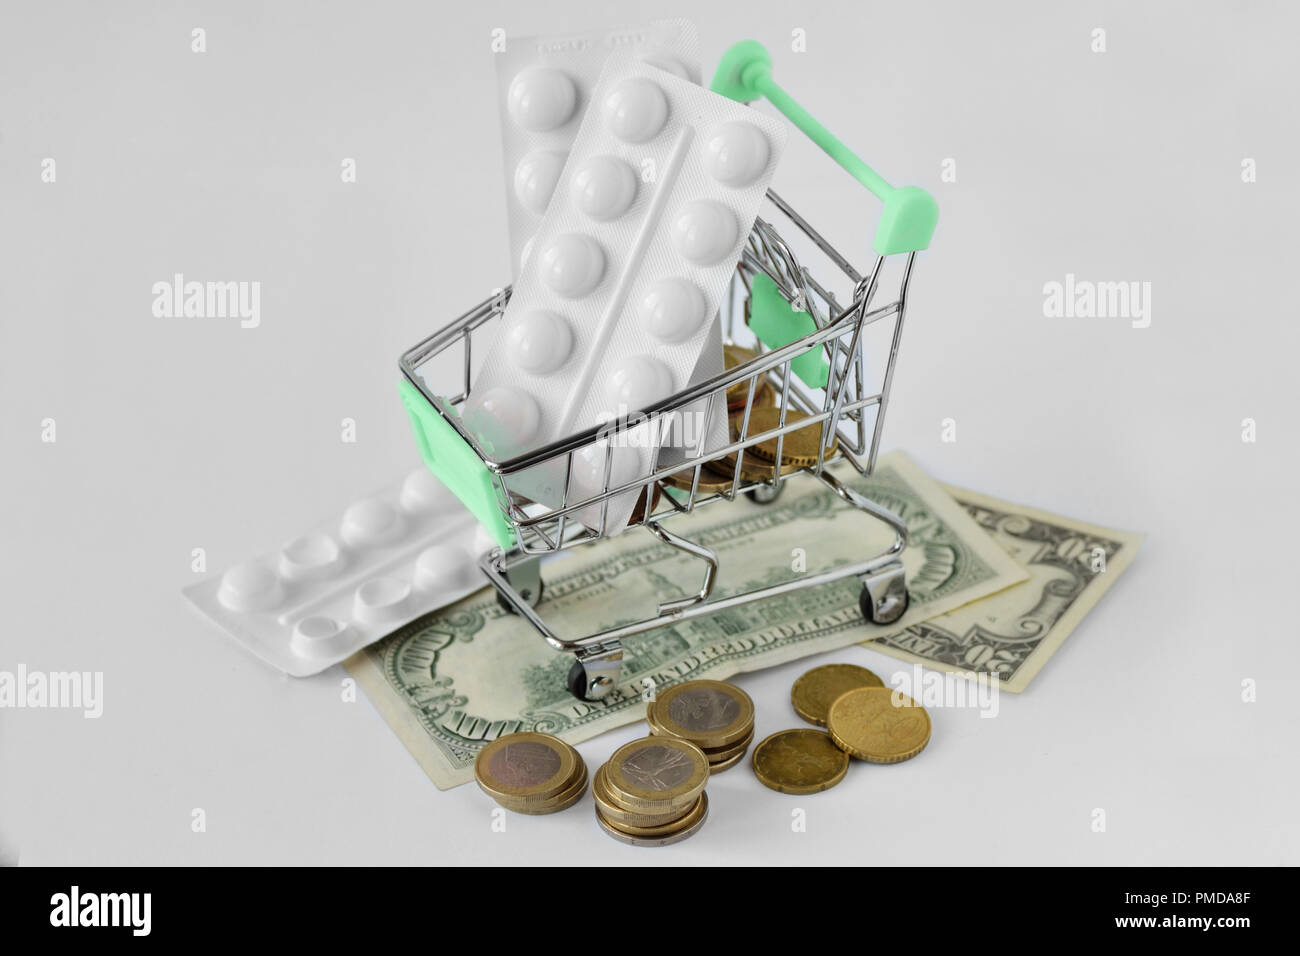 Shopping cart with medicine pills on money - Pharmaceutical cost concept Stock Photo